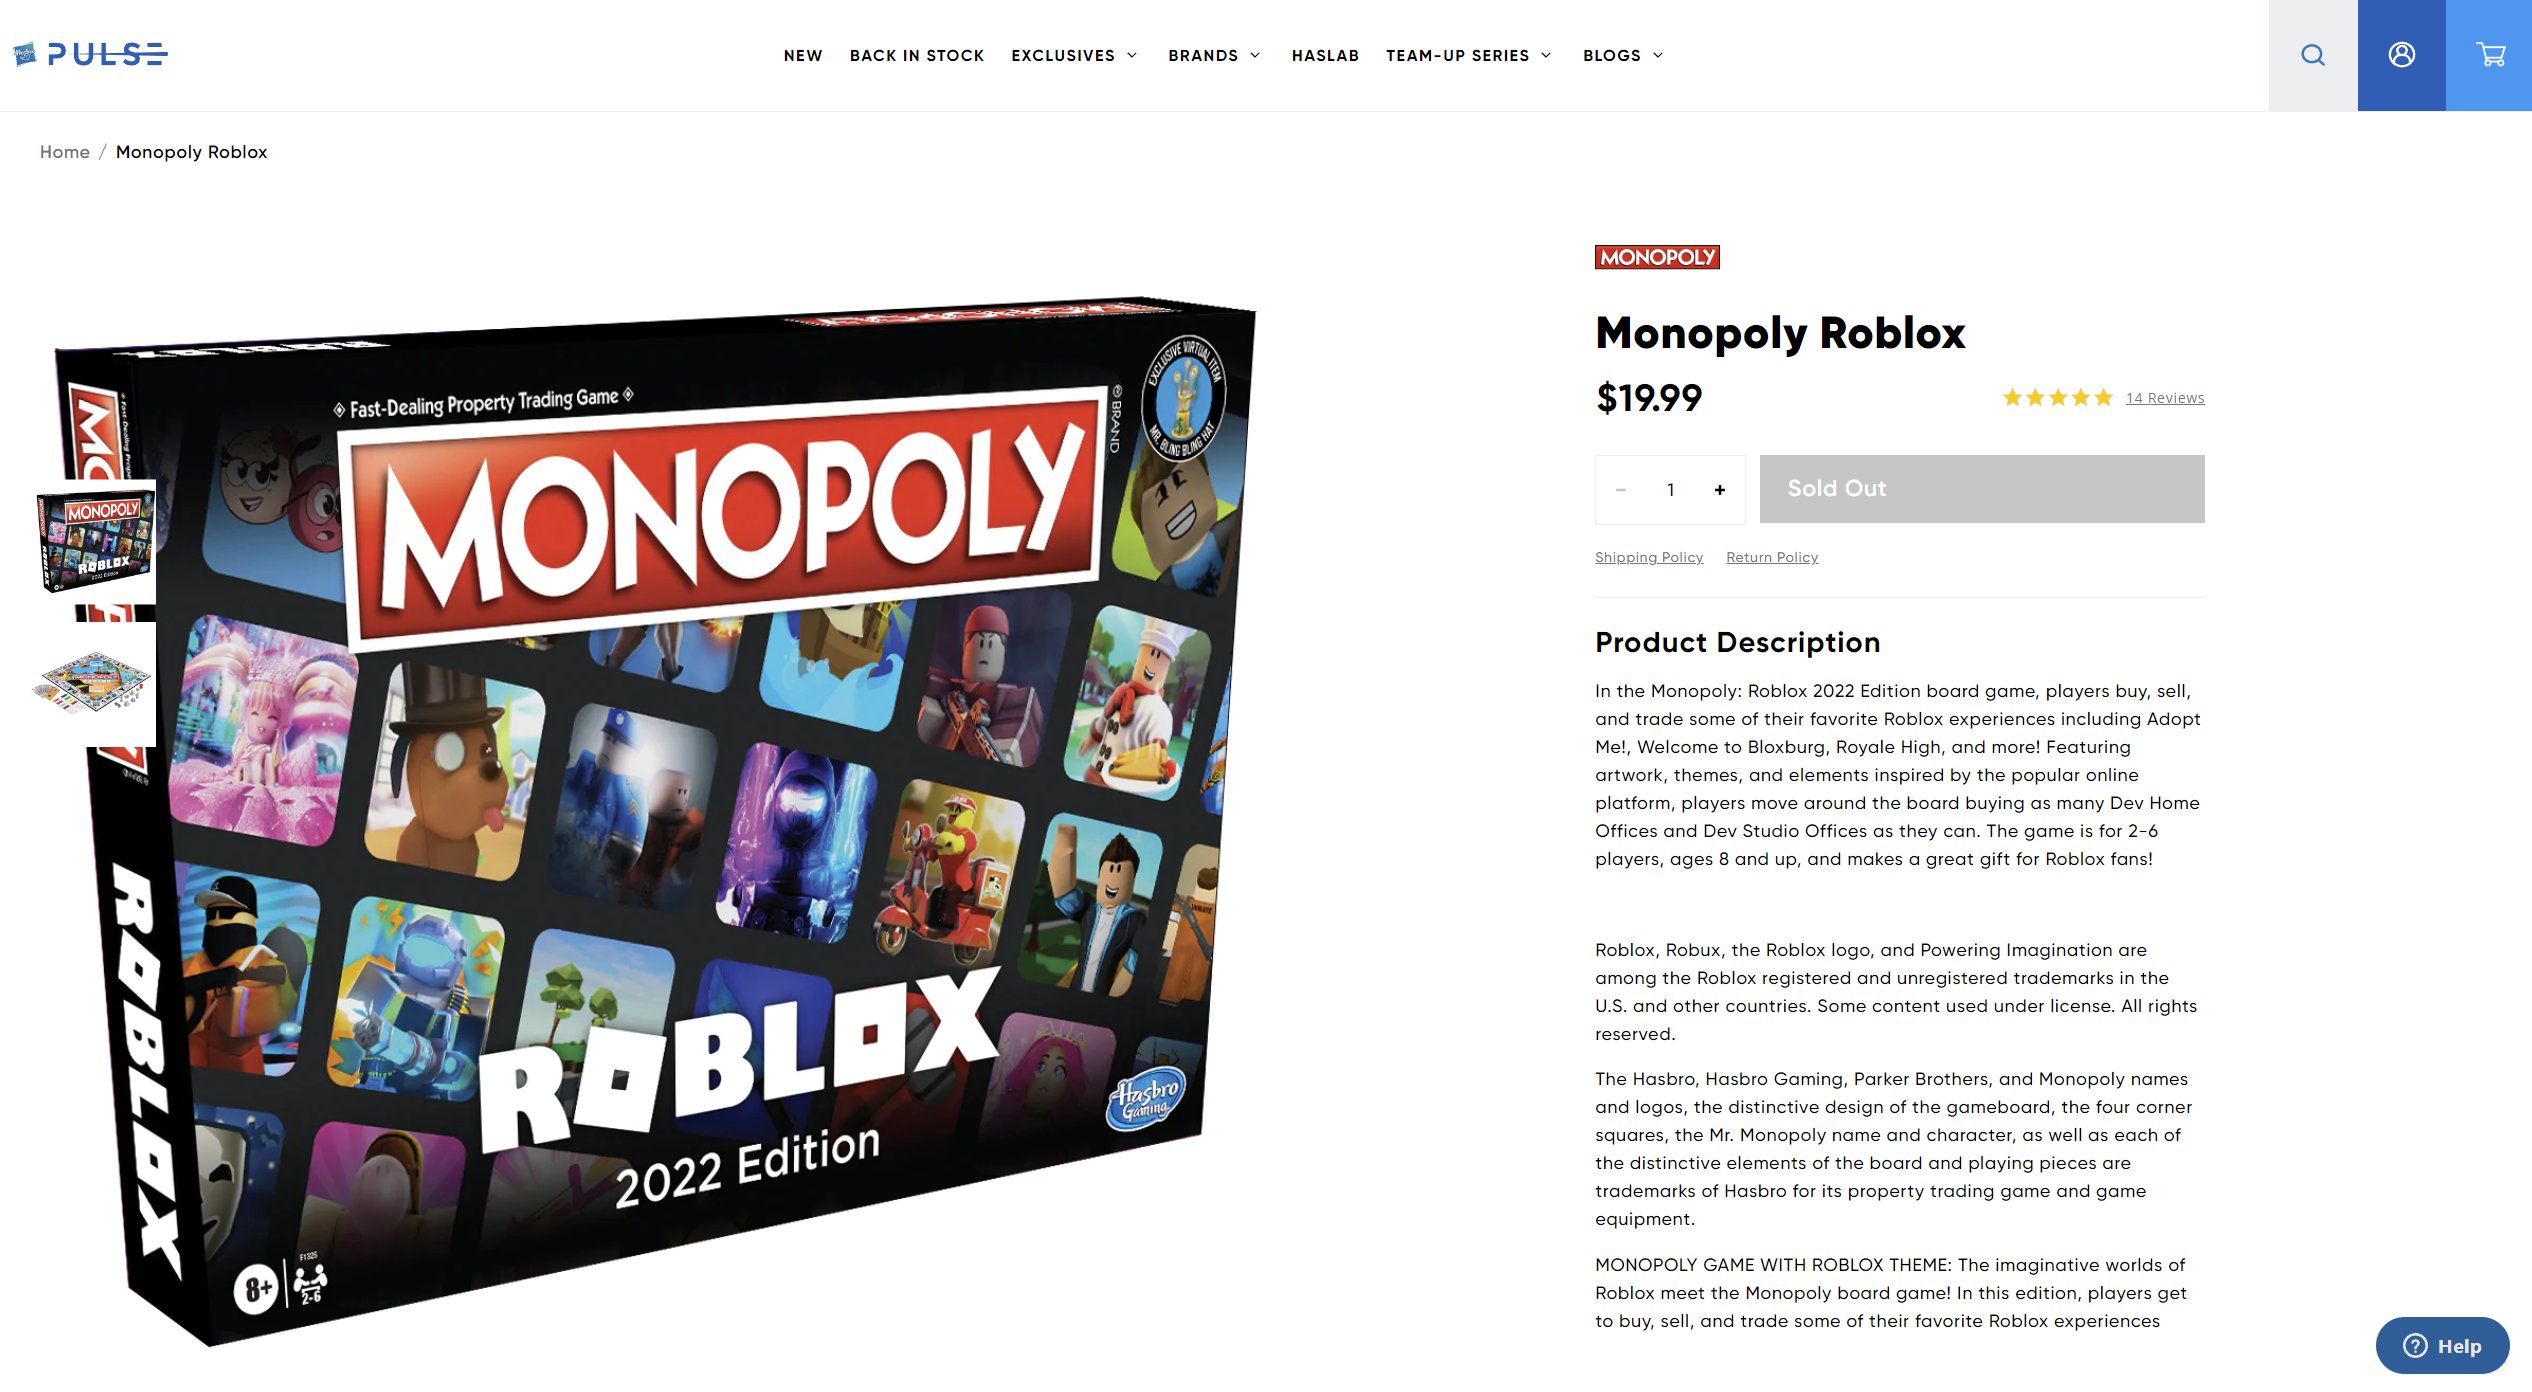 Bloxy News on X: The perfect gift for any #Roblox fan. 🐉 Every